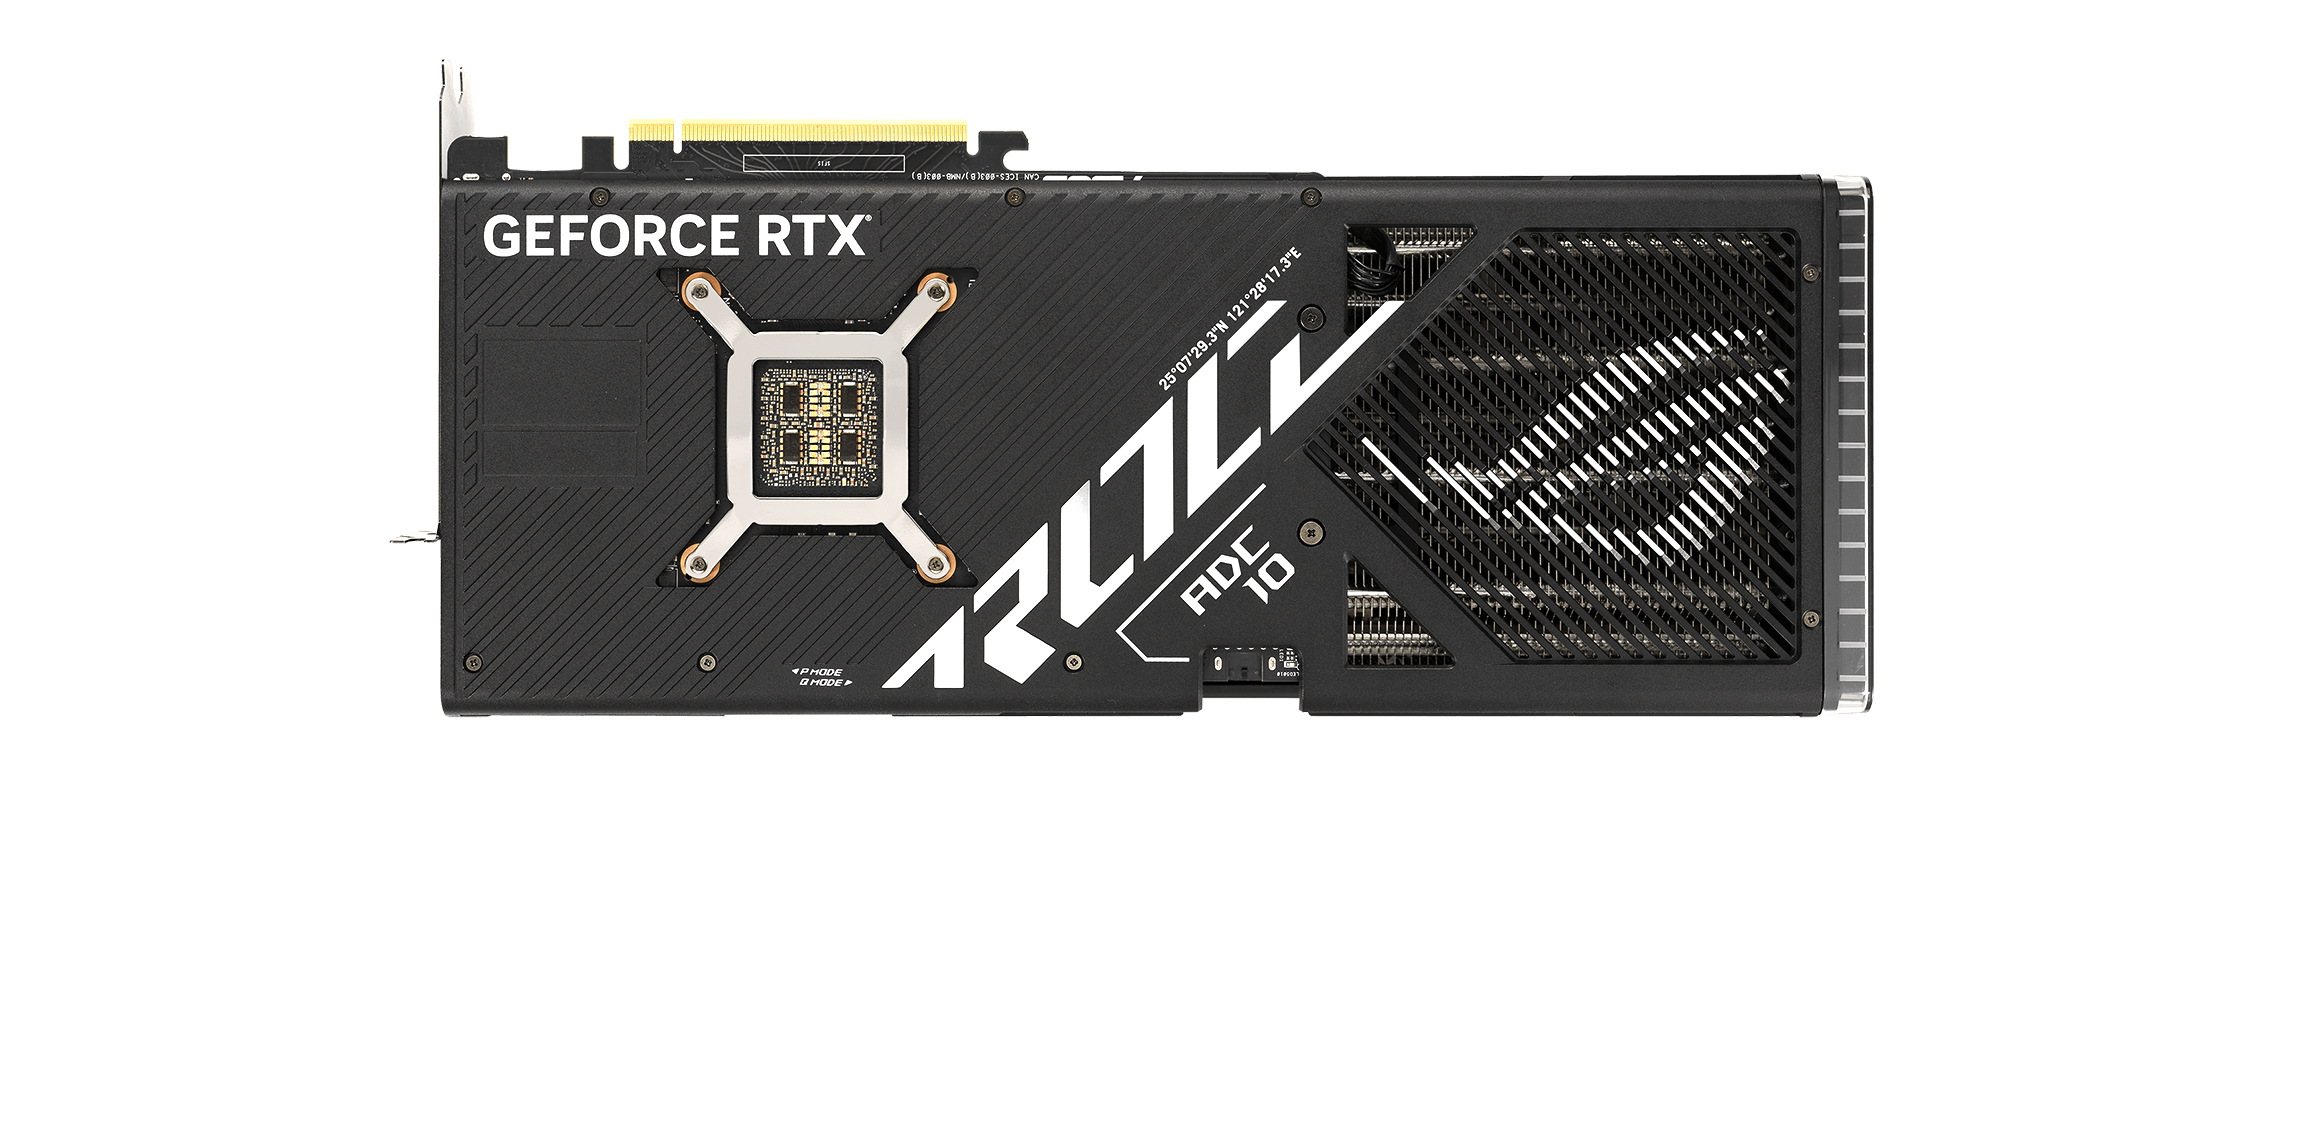 Rear view of the ROG Strix GeForce RTX 4090 graphics card.